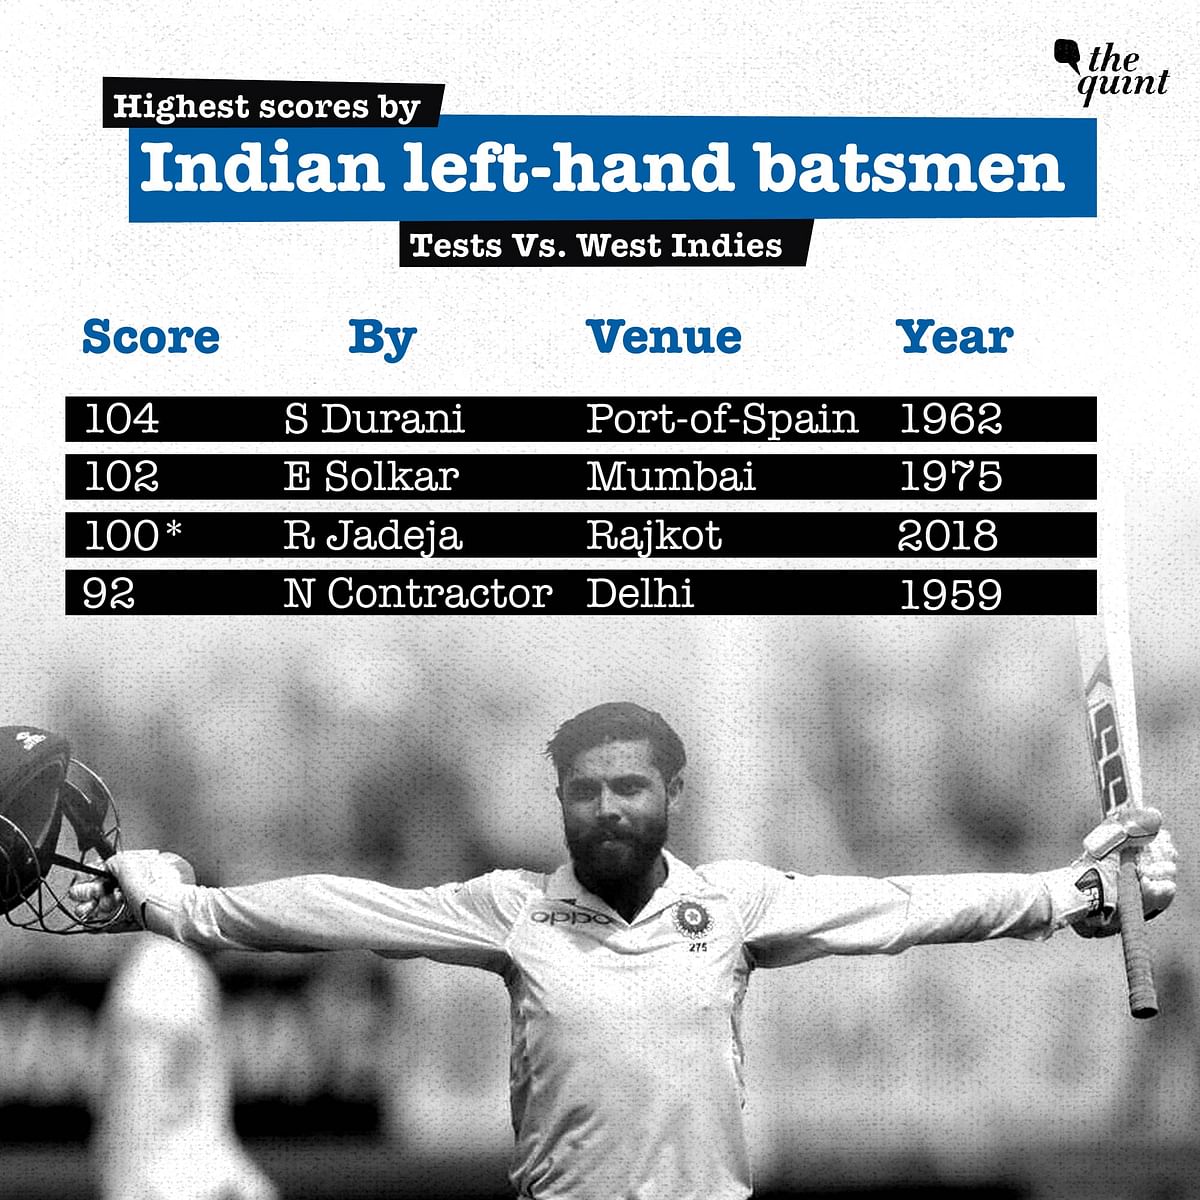 Virat Kohli also became the quickest Indian (and the second-fastest batsman overall) to score 24 Test centuries.